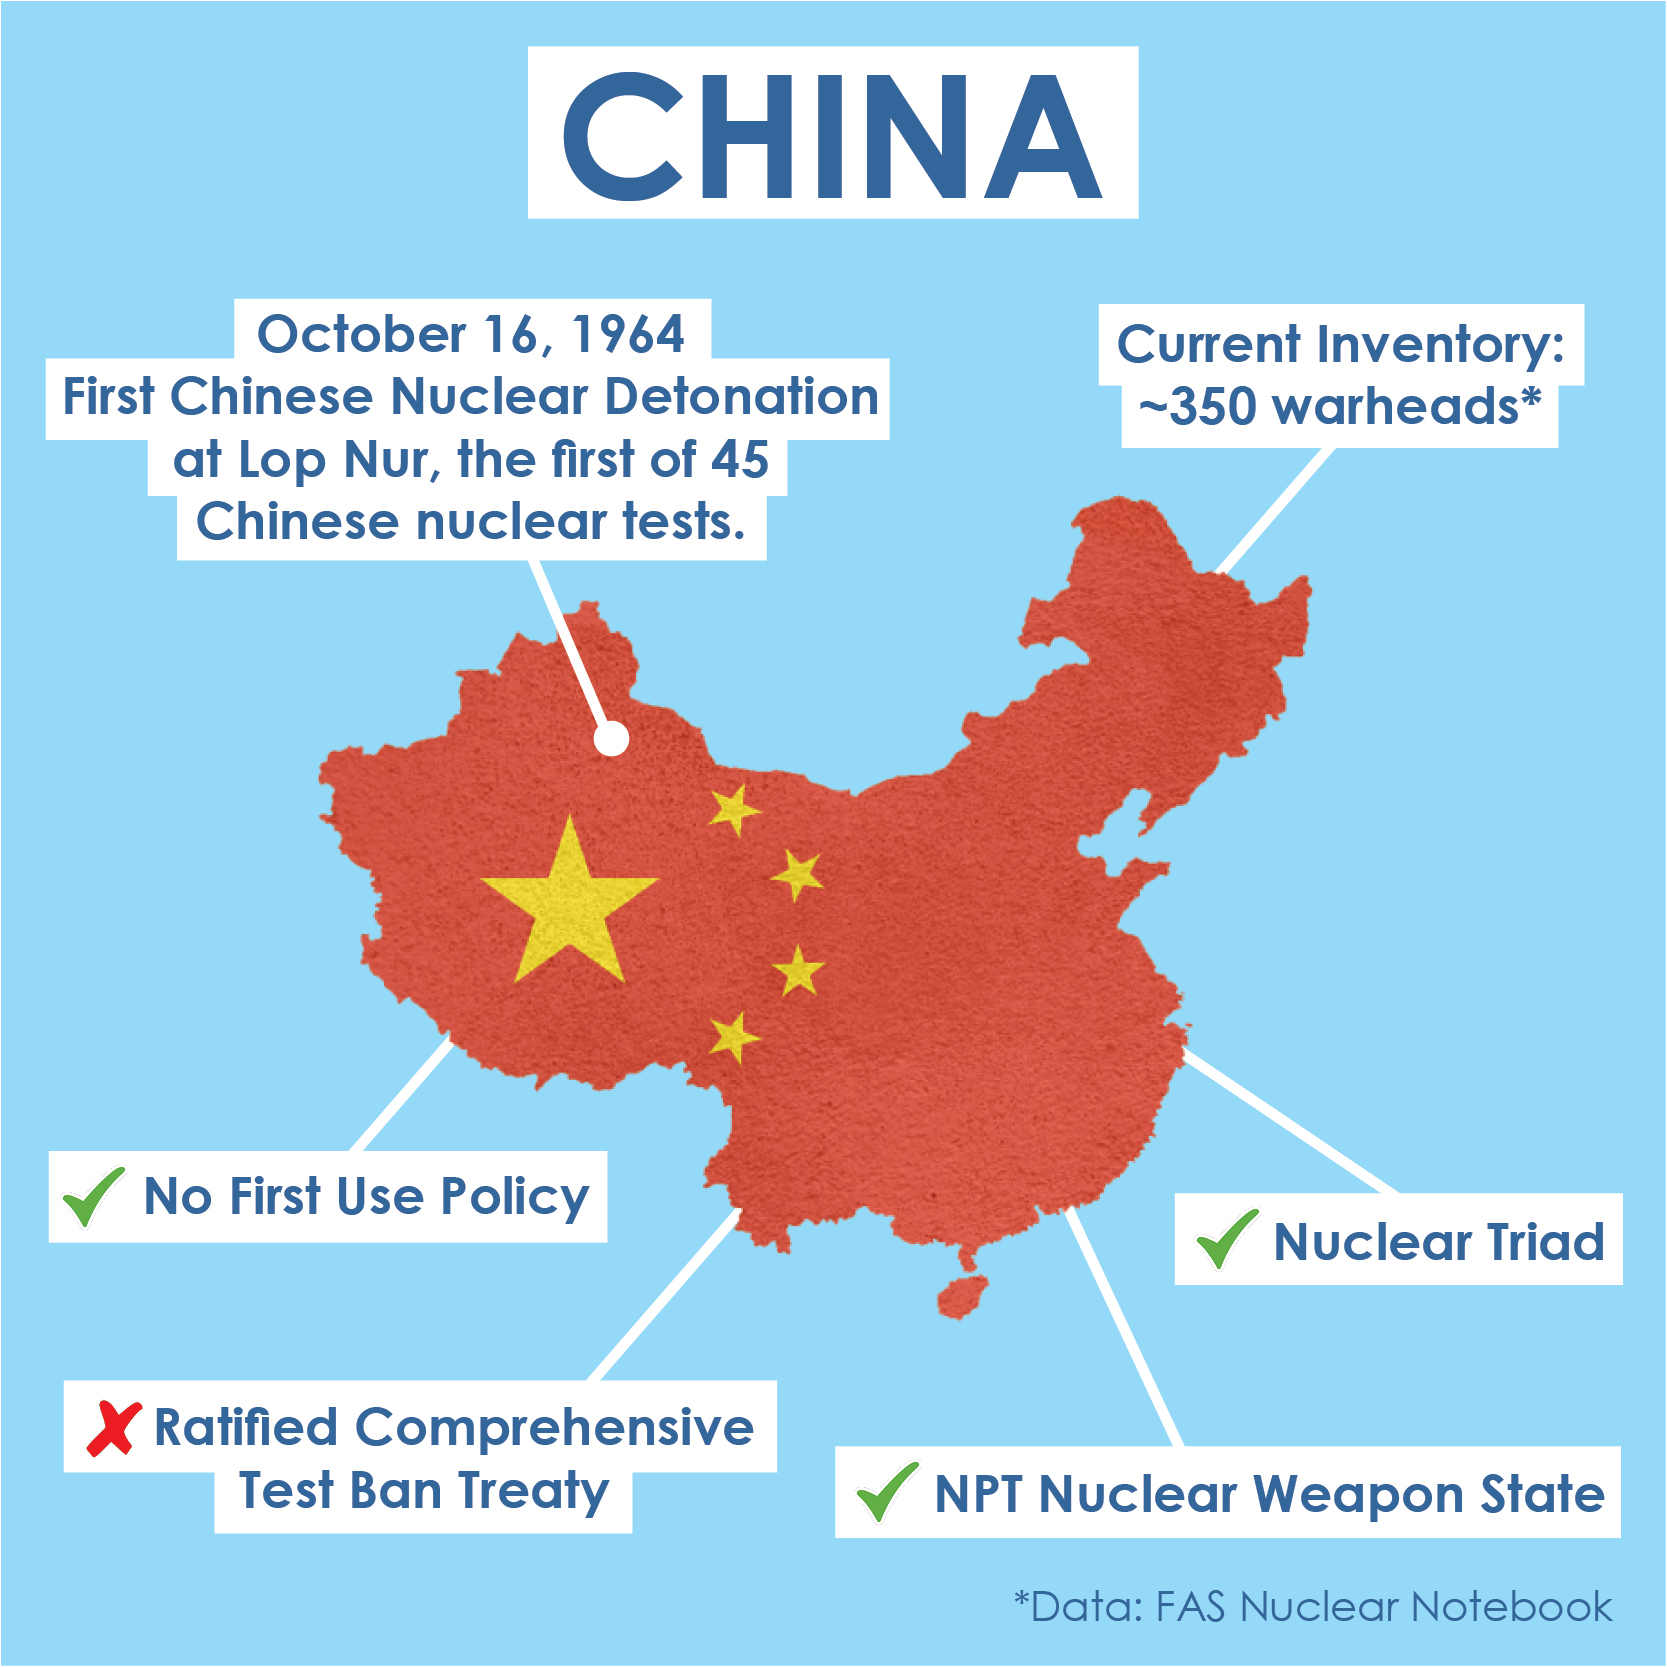 China-Overview.jpg